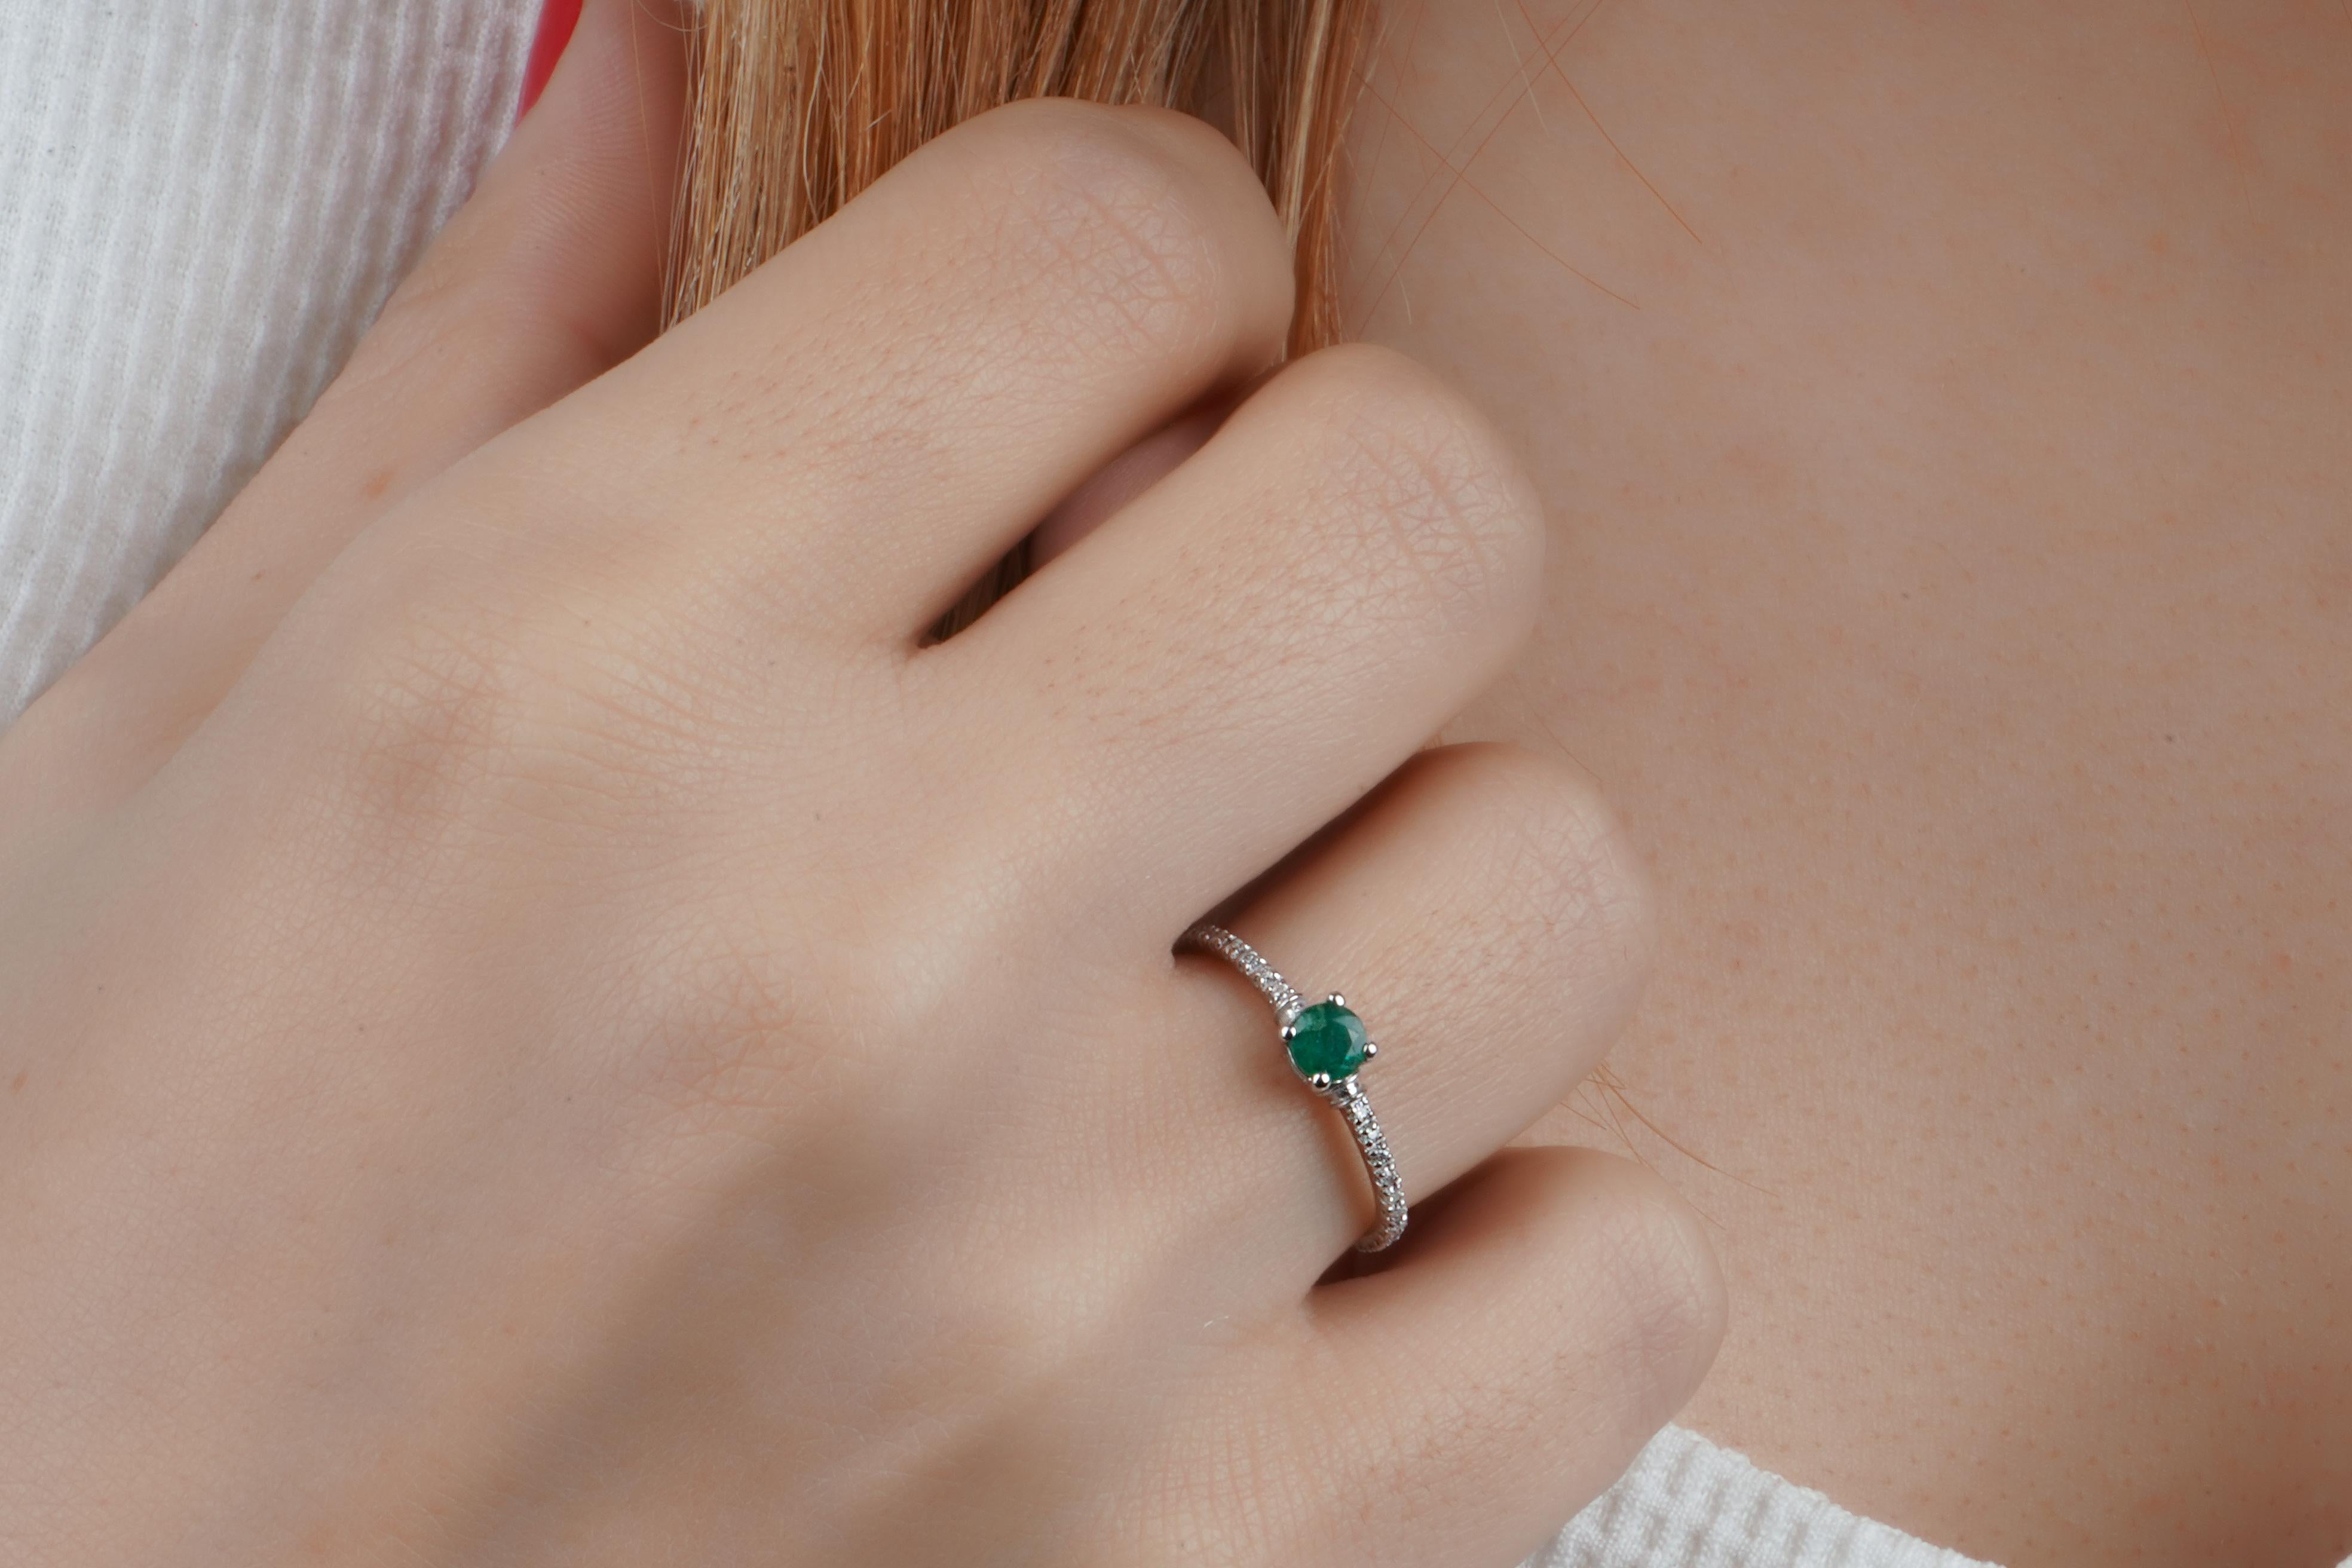 Are you looking for a ring that will make you feel like royalty? Do you want to impress your loved ones with a stunning and meaningful gift? If so, you will love the Endalaus emerald ring!

This ring is made of 18k solid gold and features a natural